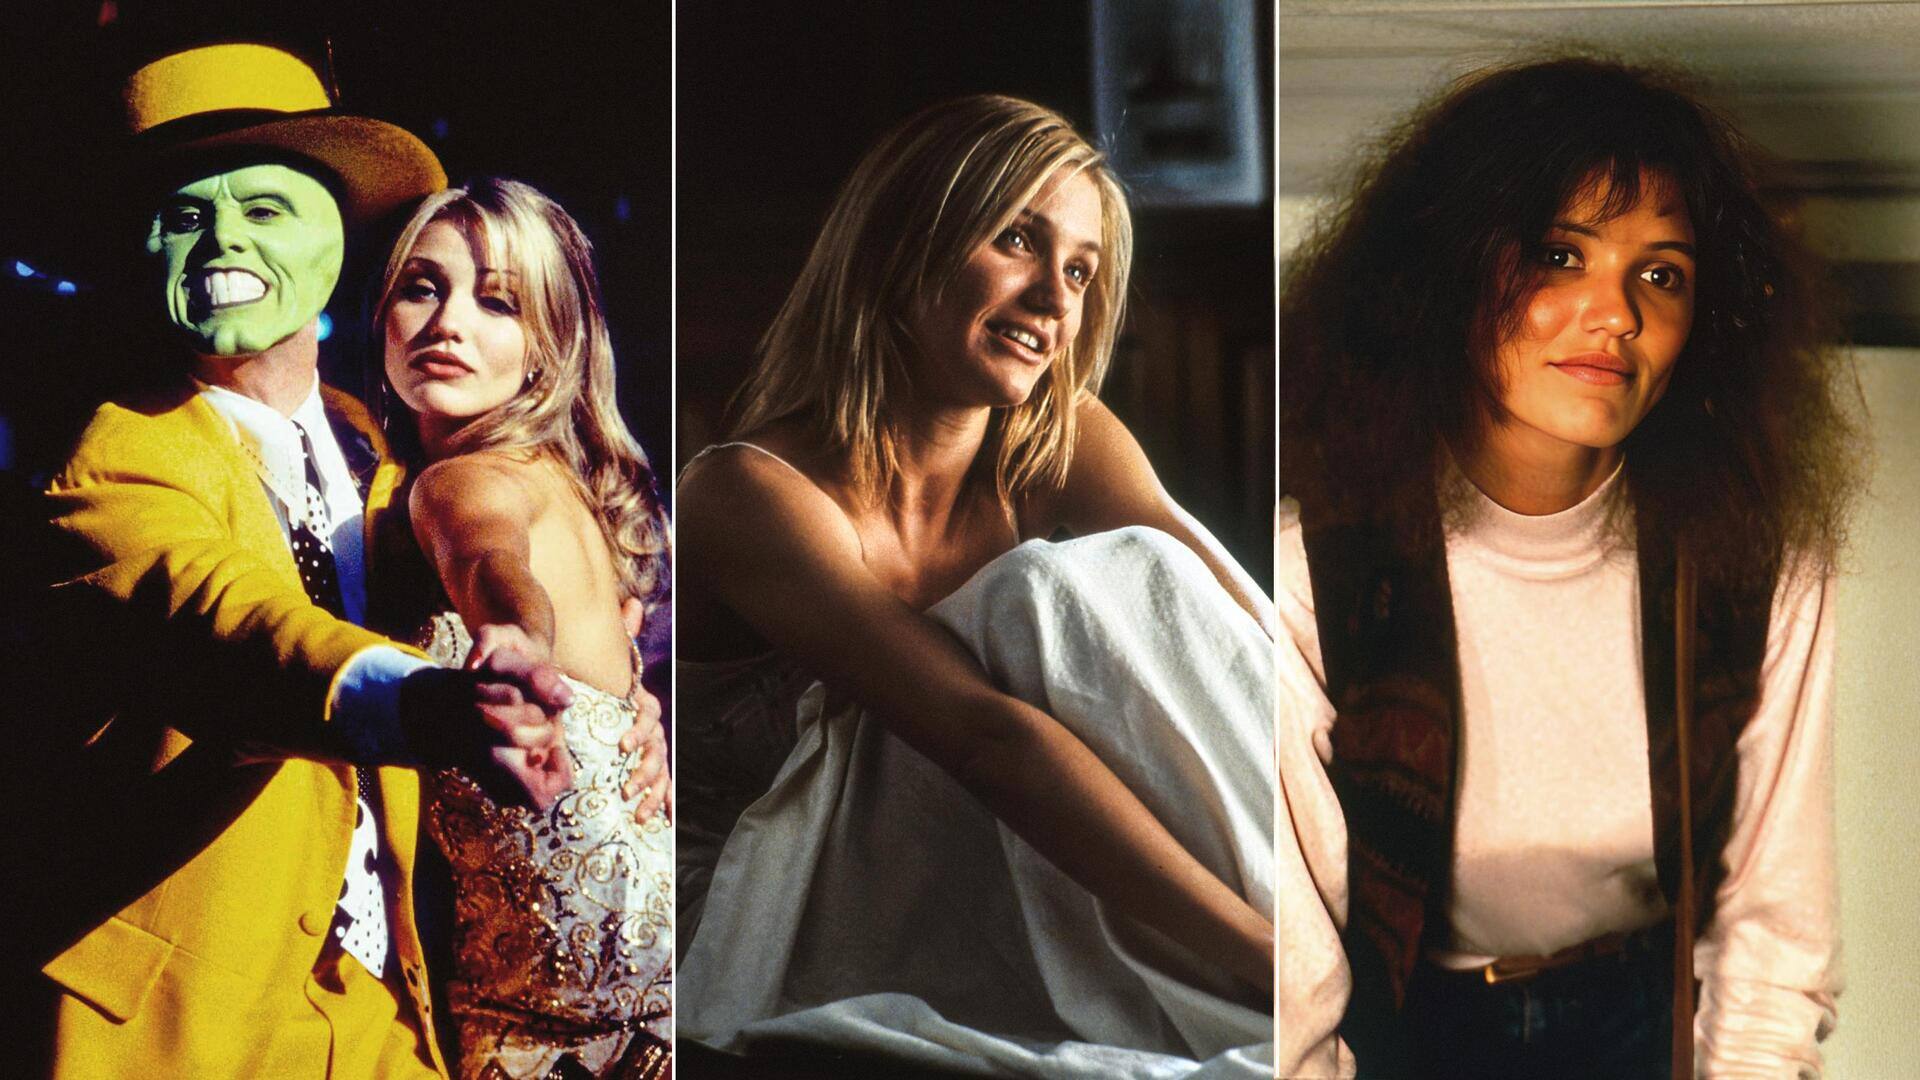 Hollywood actor Cameron Diaz's best roles